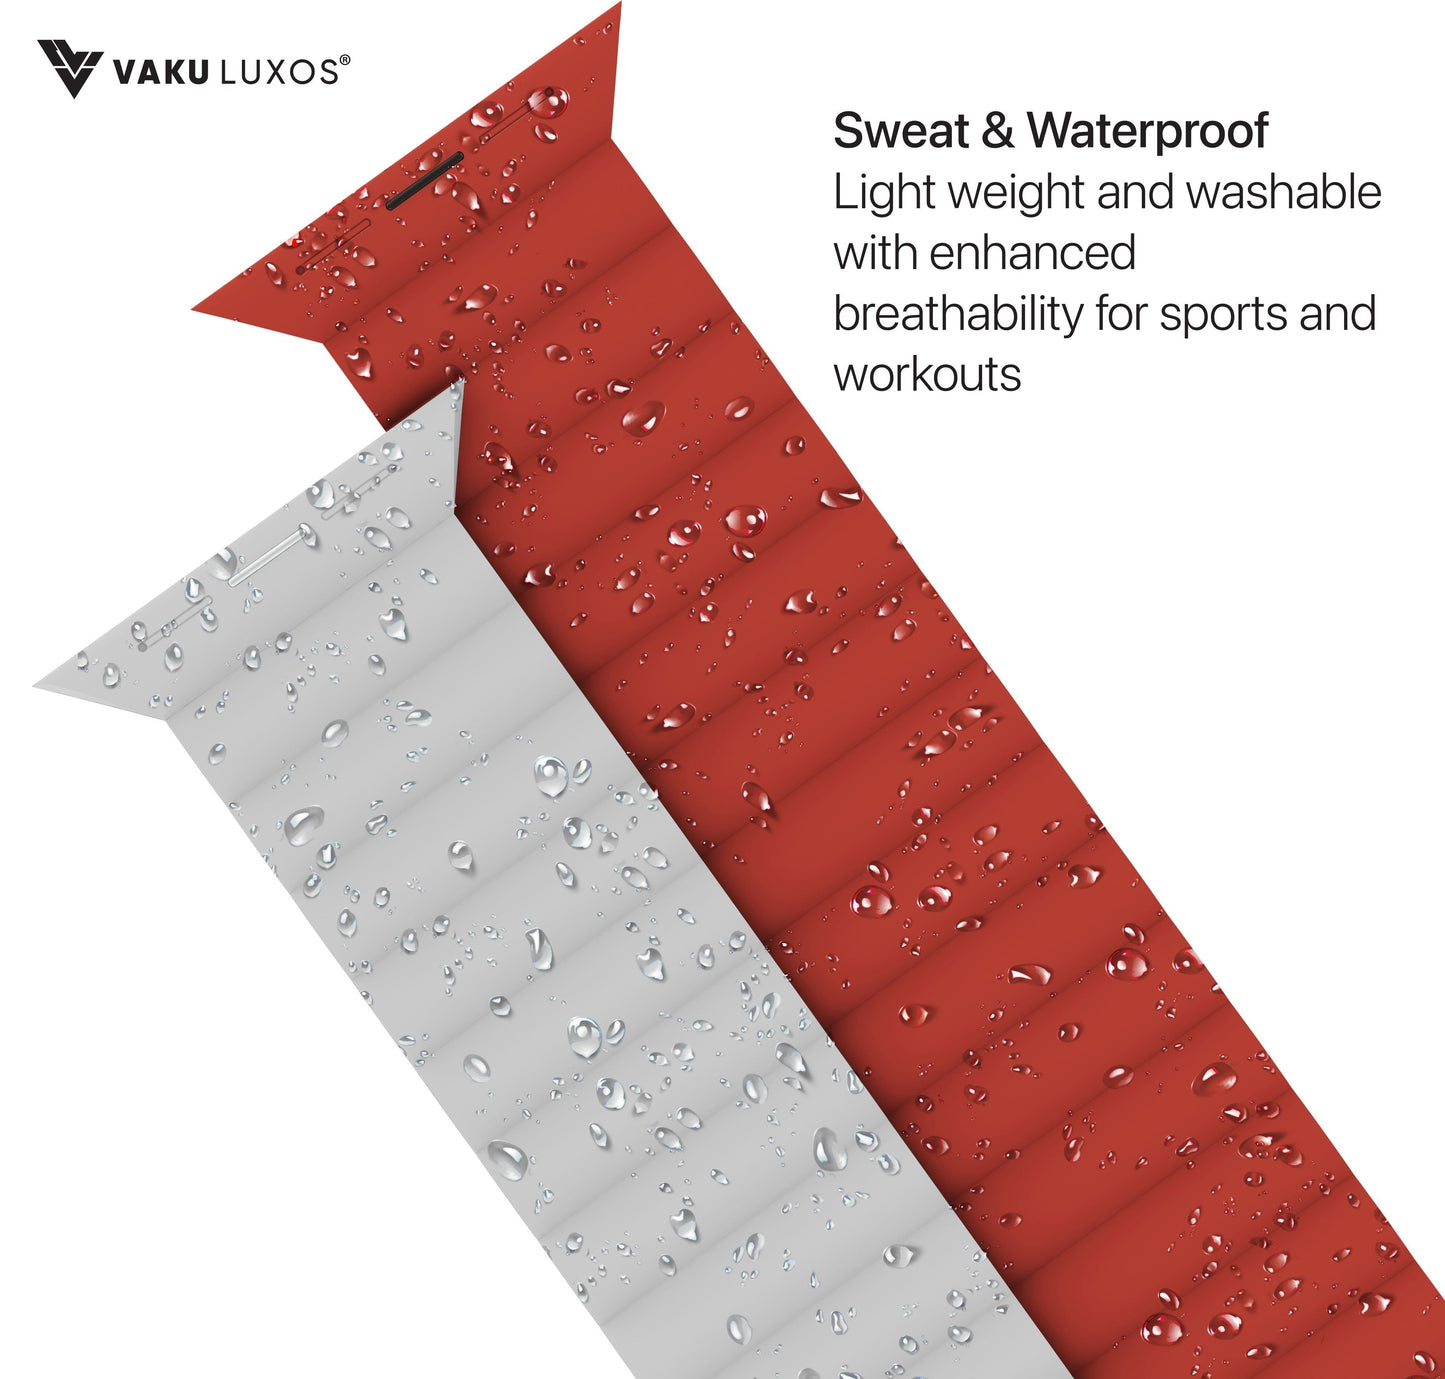 vaku-luxos®-stark-magnetic-self-adjusting-fit-silicon-watch-straps-for-45mm-42-44mm-red8905129016241